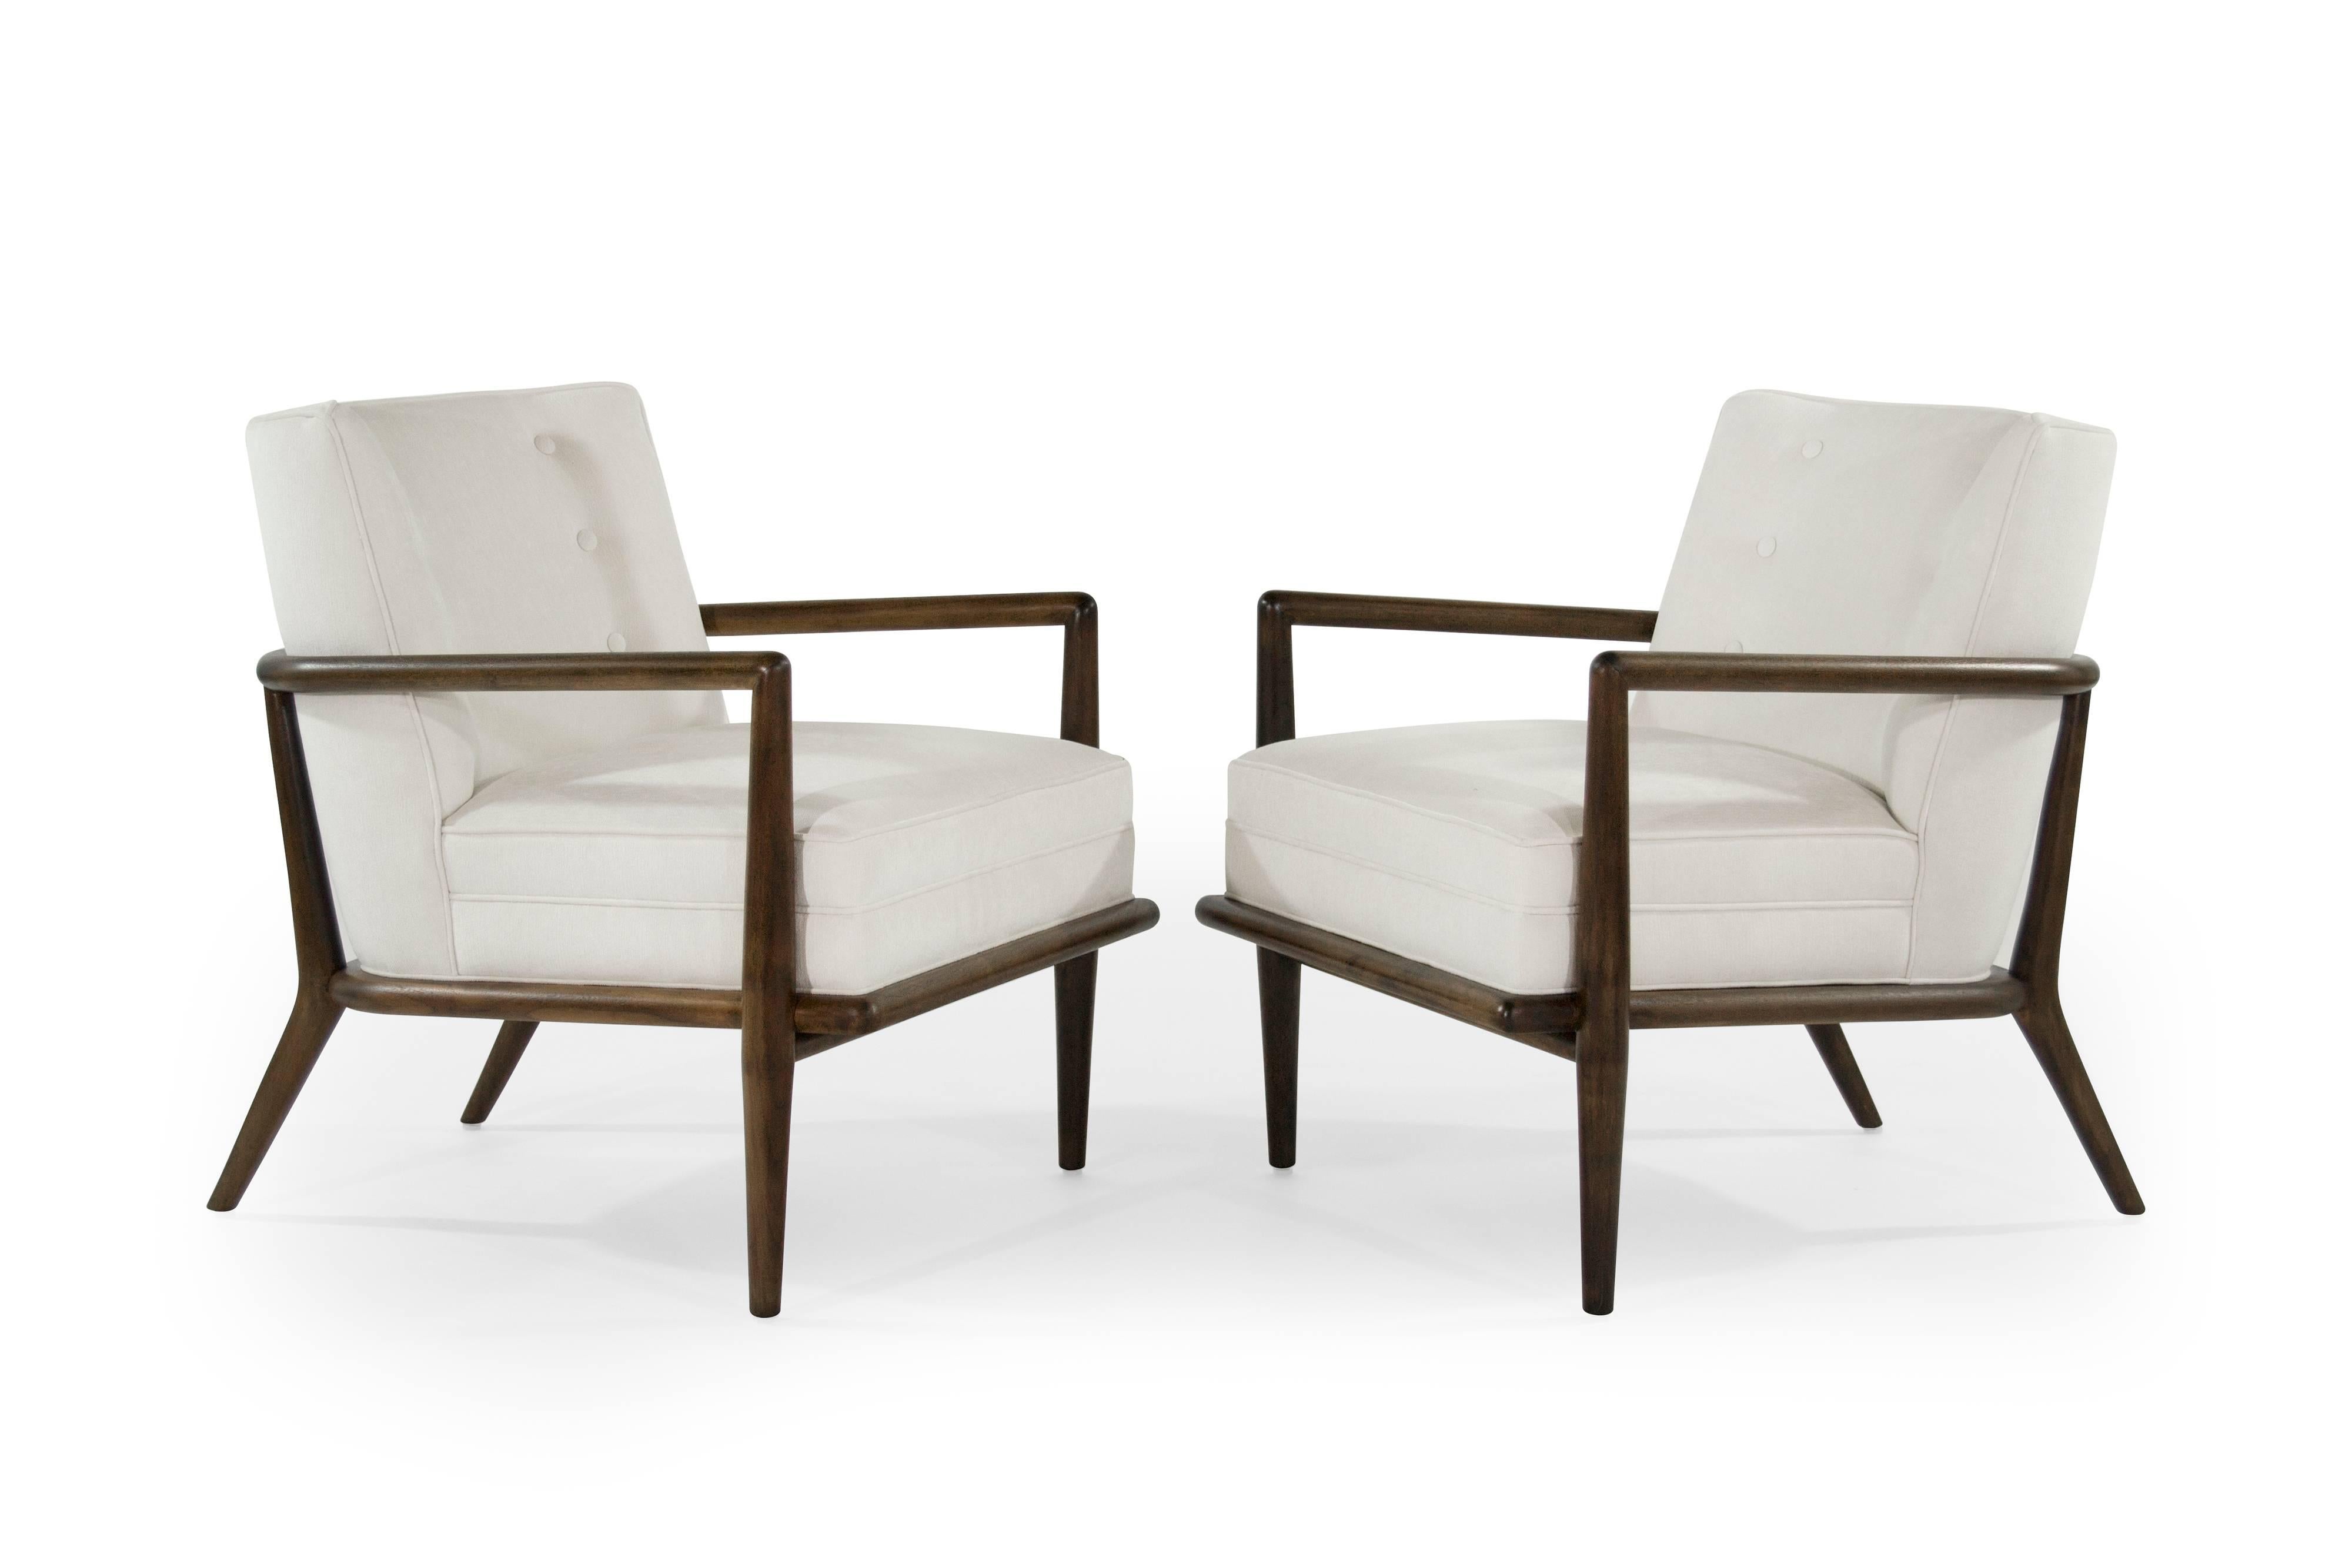 Rare set of walnut tub lounge chairs designed by T.H. Robsjohn-Gibbings for Widdicomb, circa 1950s. Sculptural walnut frames has been fully restored, as well as re-upholster in a soft off-white velvet.